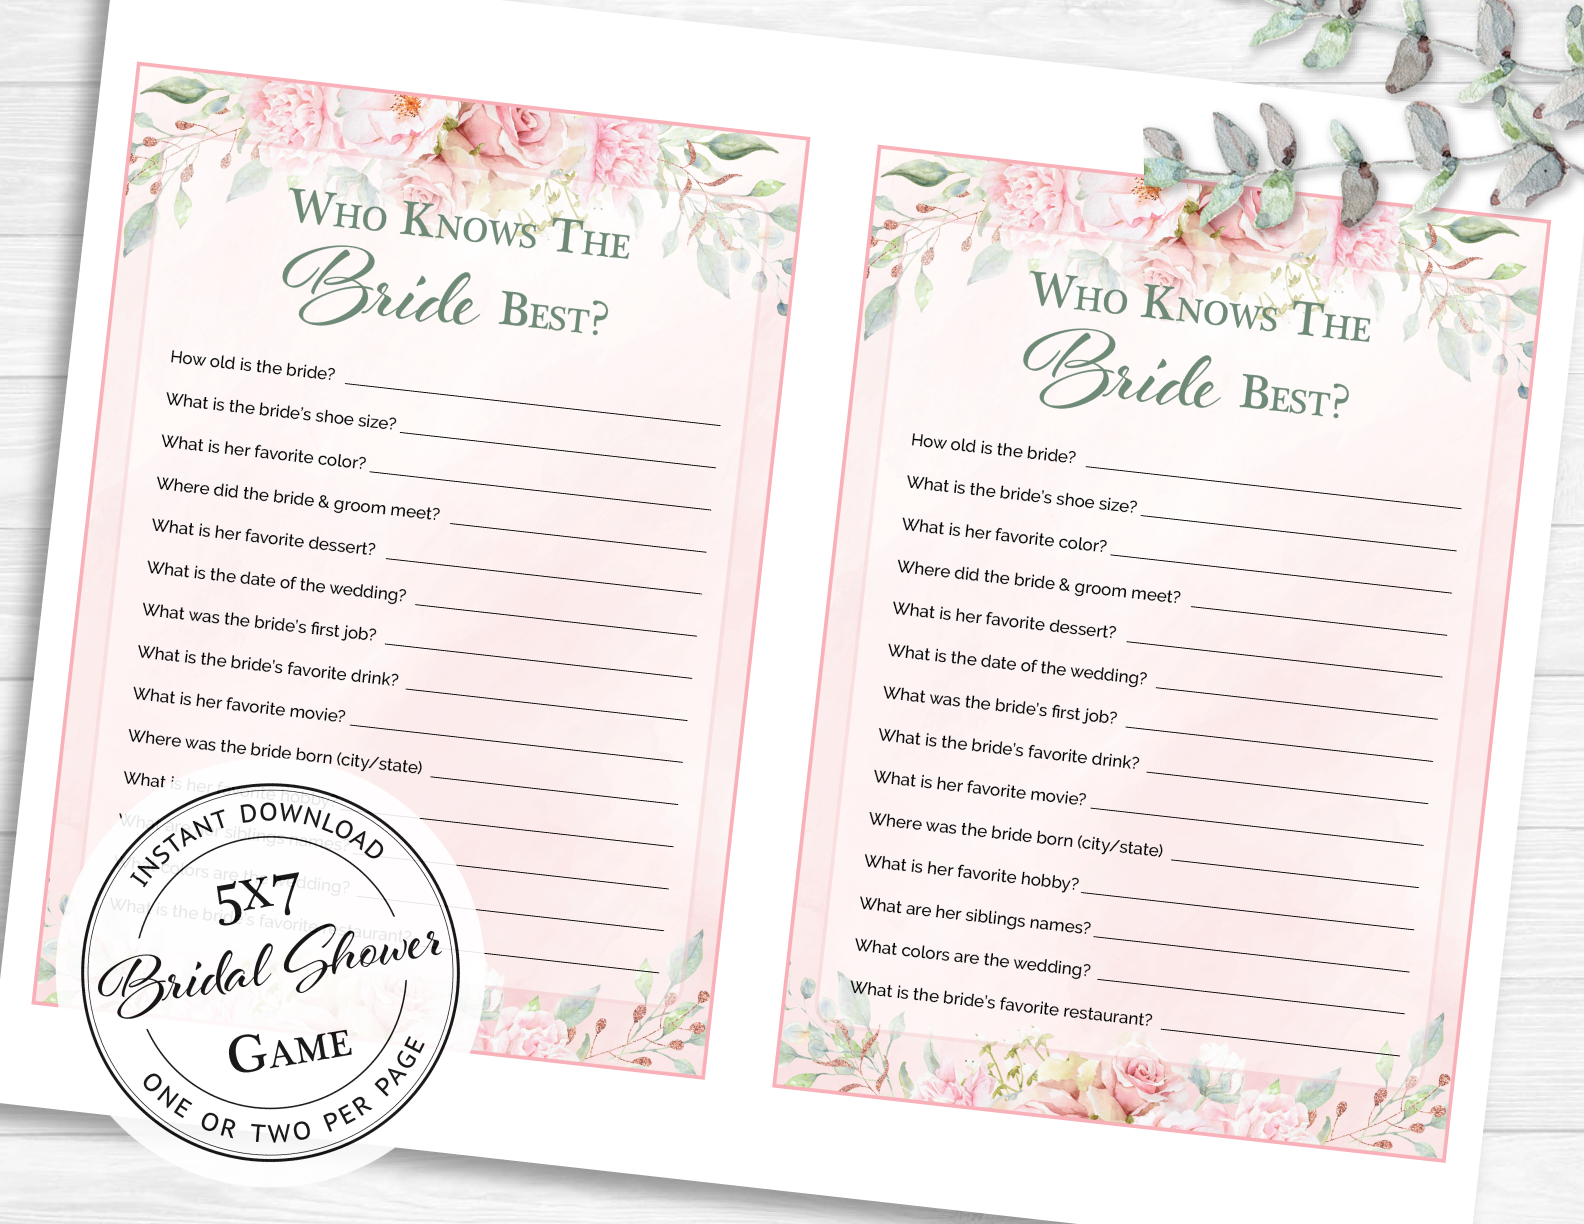 Free Printable Who Knows the Bride Best Game - Pjs and Paint